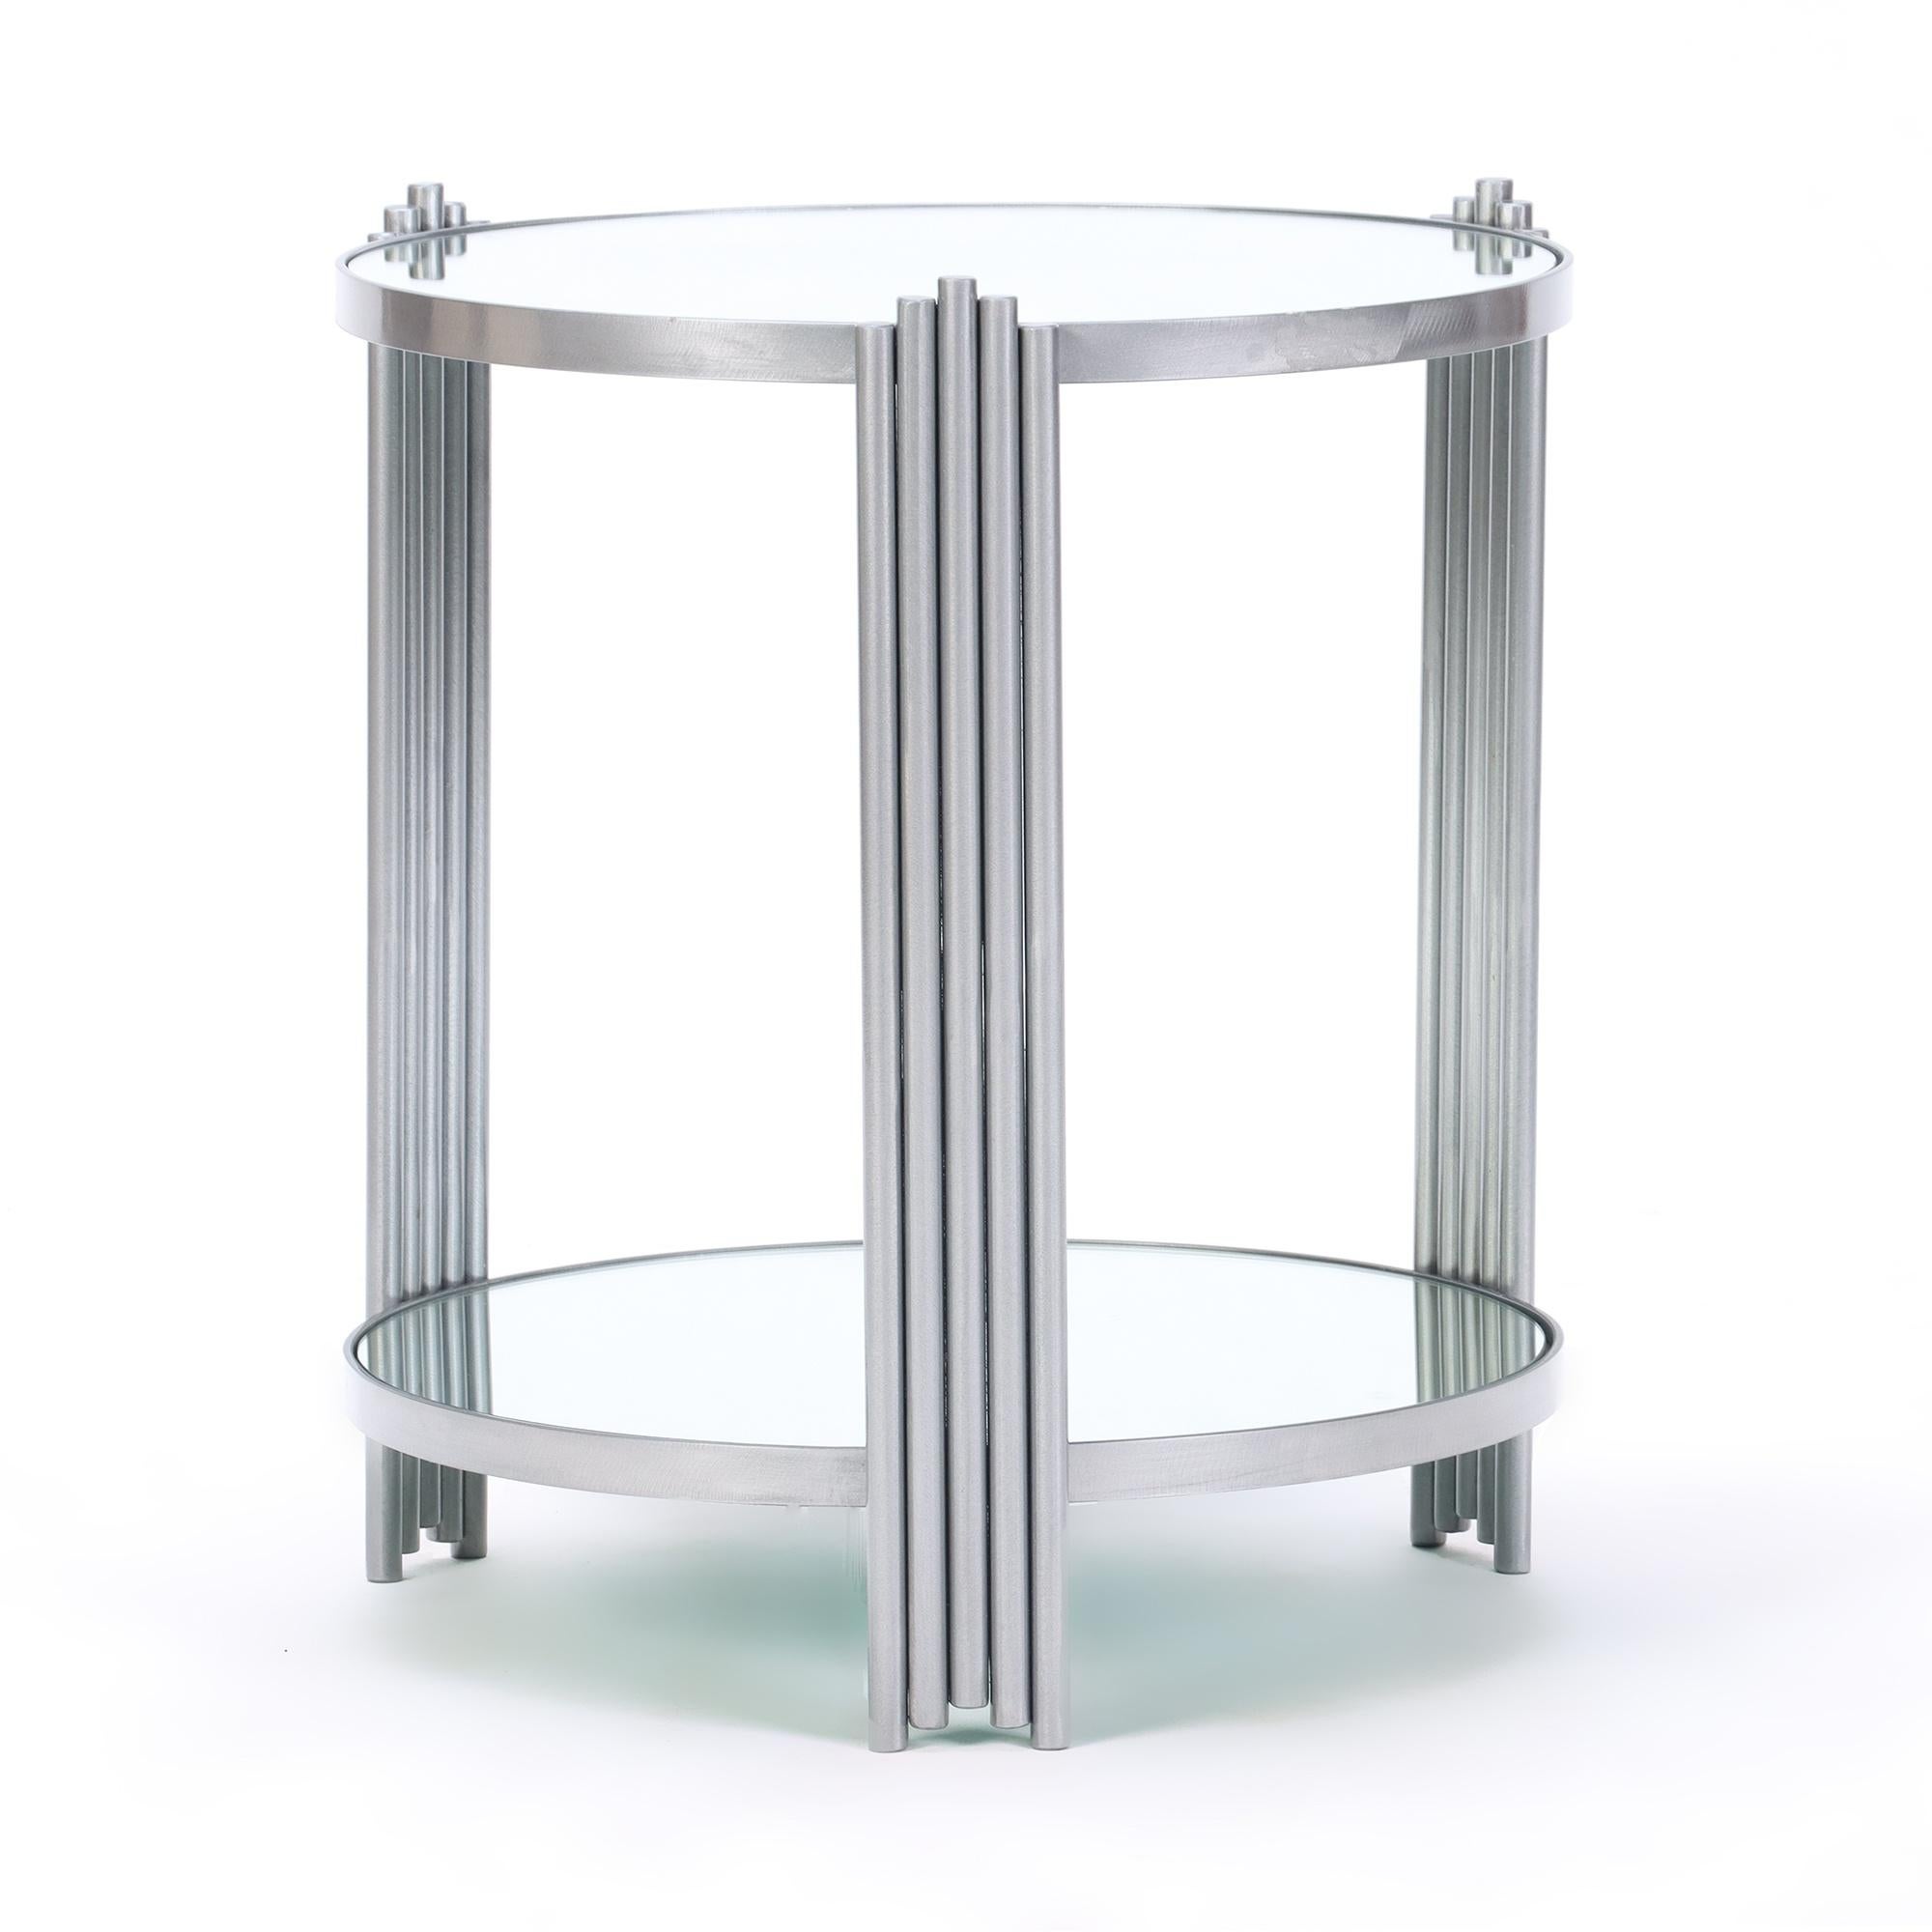 An elegant and stylish pair of Art Deco style round end tables with mirrored tops. Contemporary.